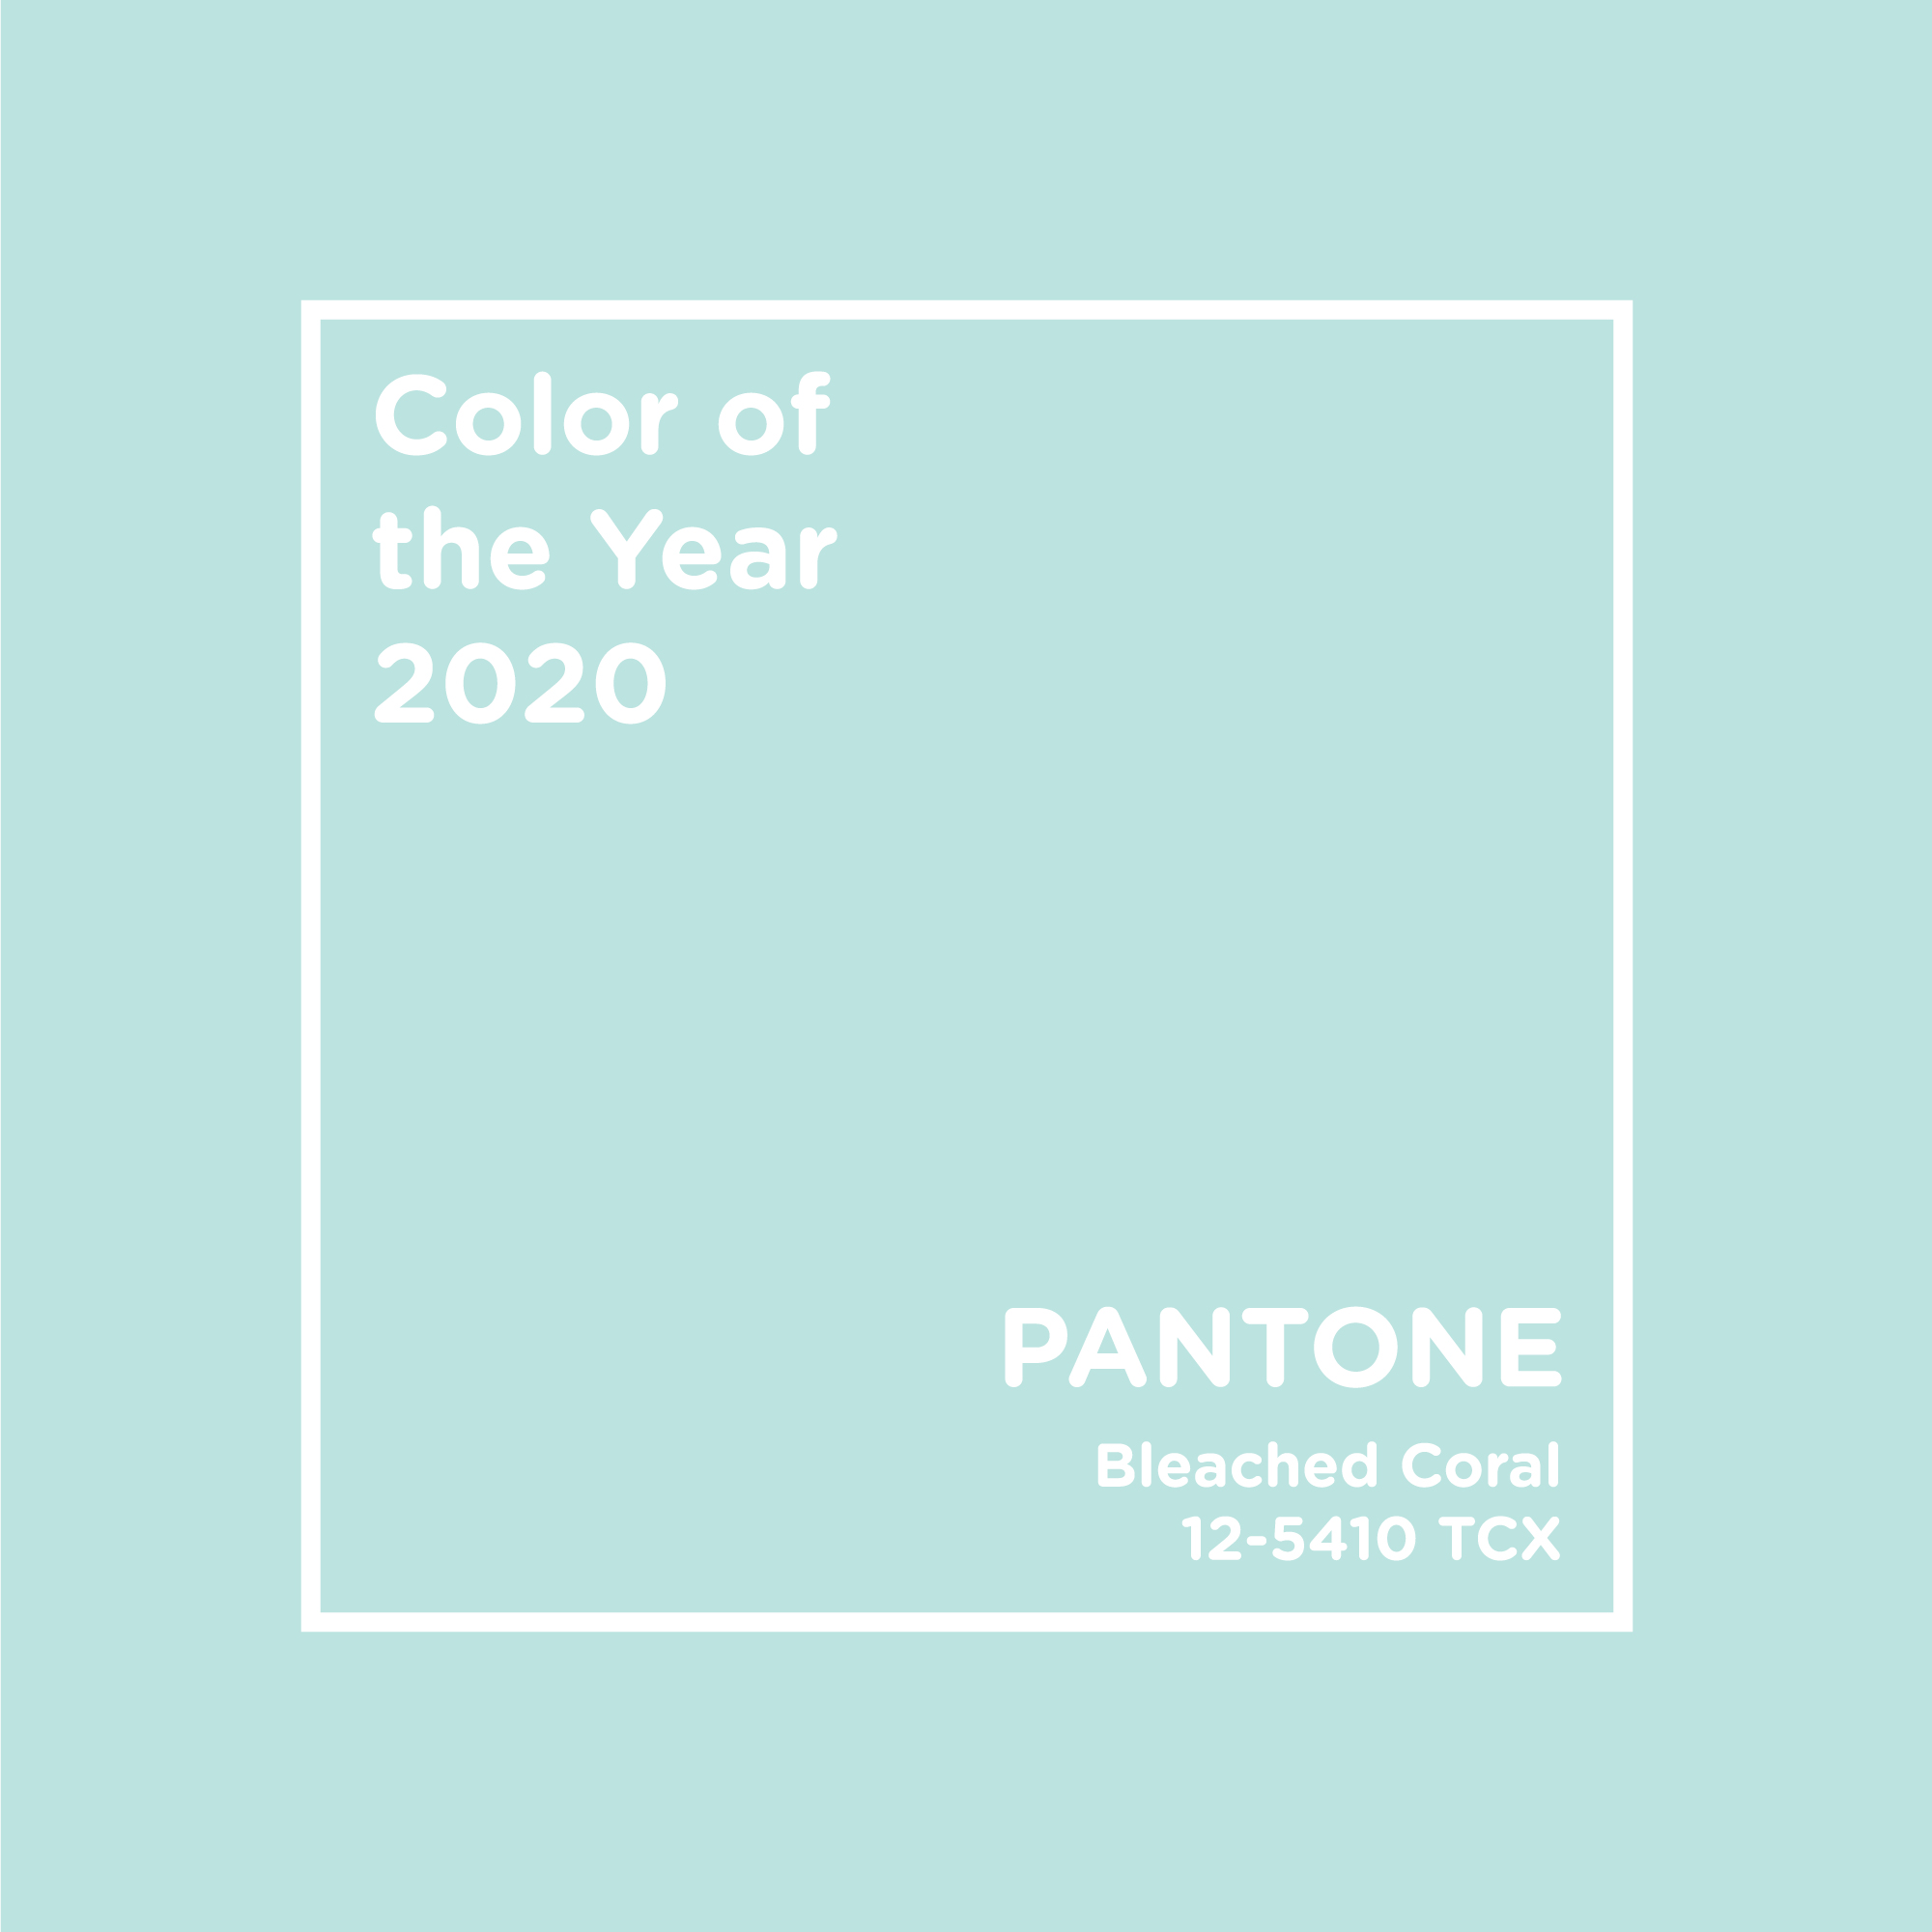 Bleached Coral - Farbe des Jahres 2020